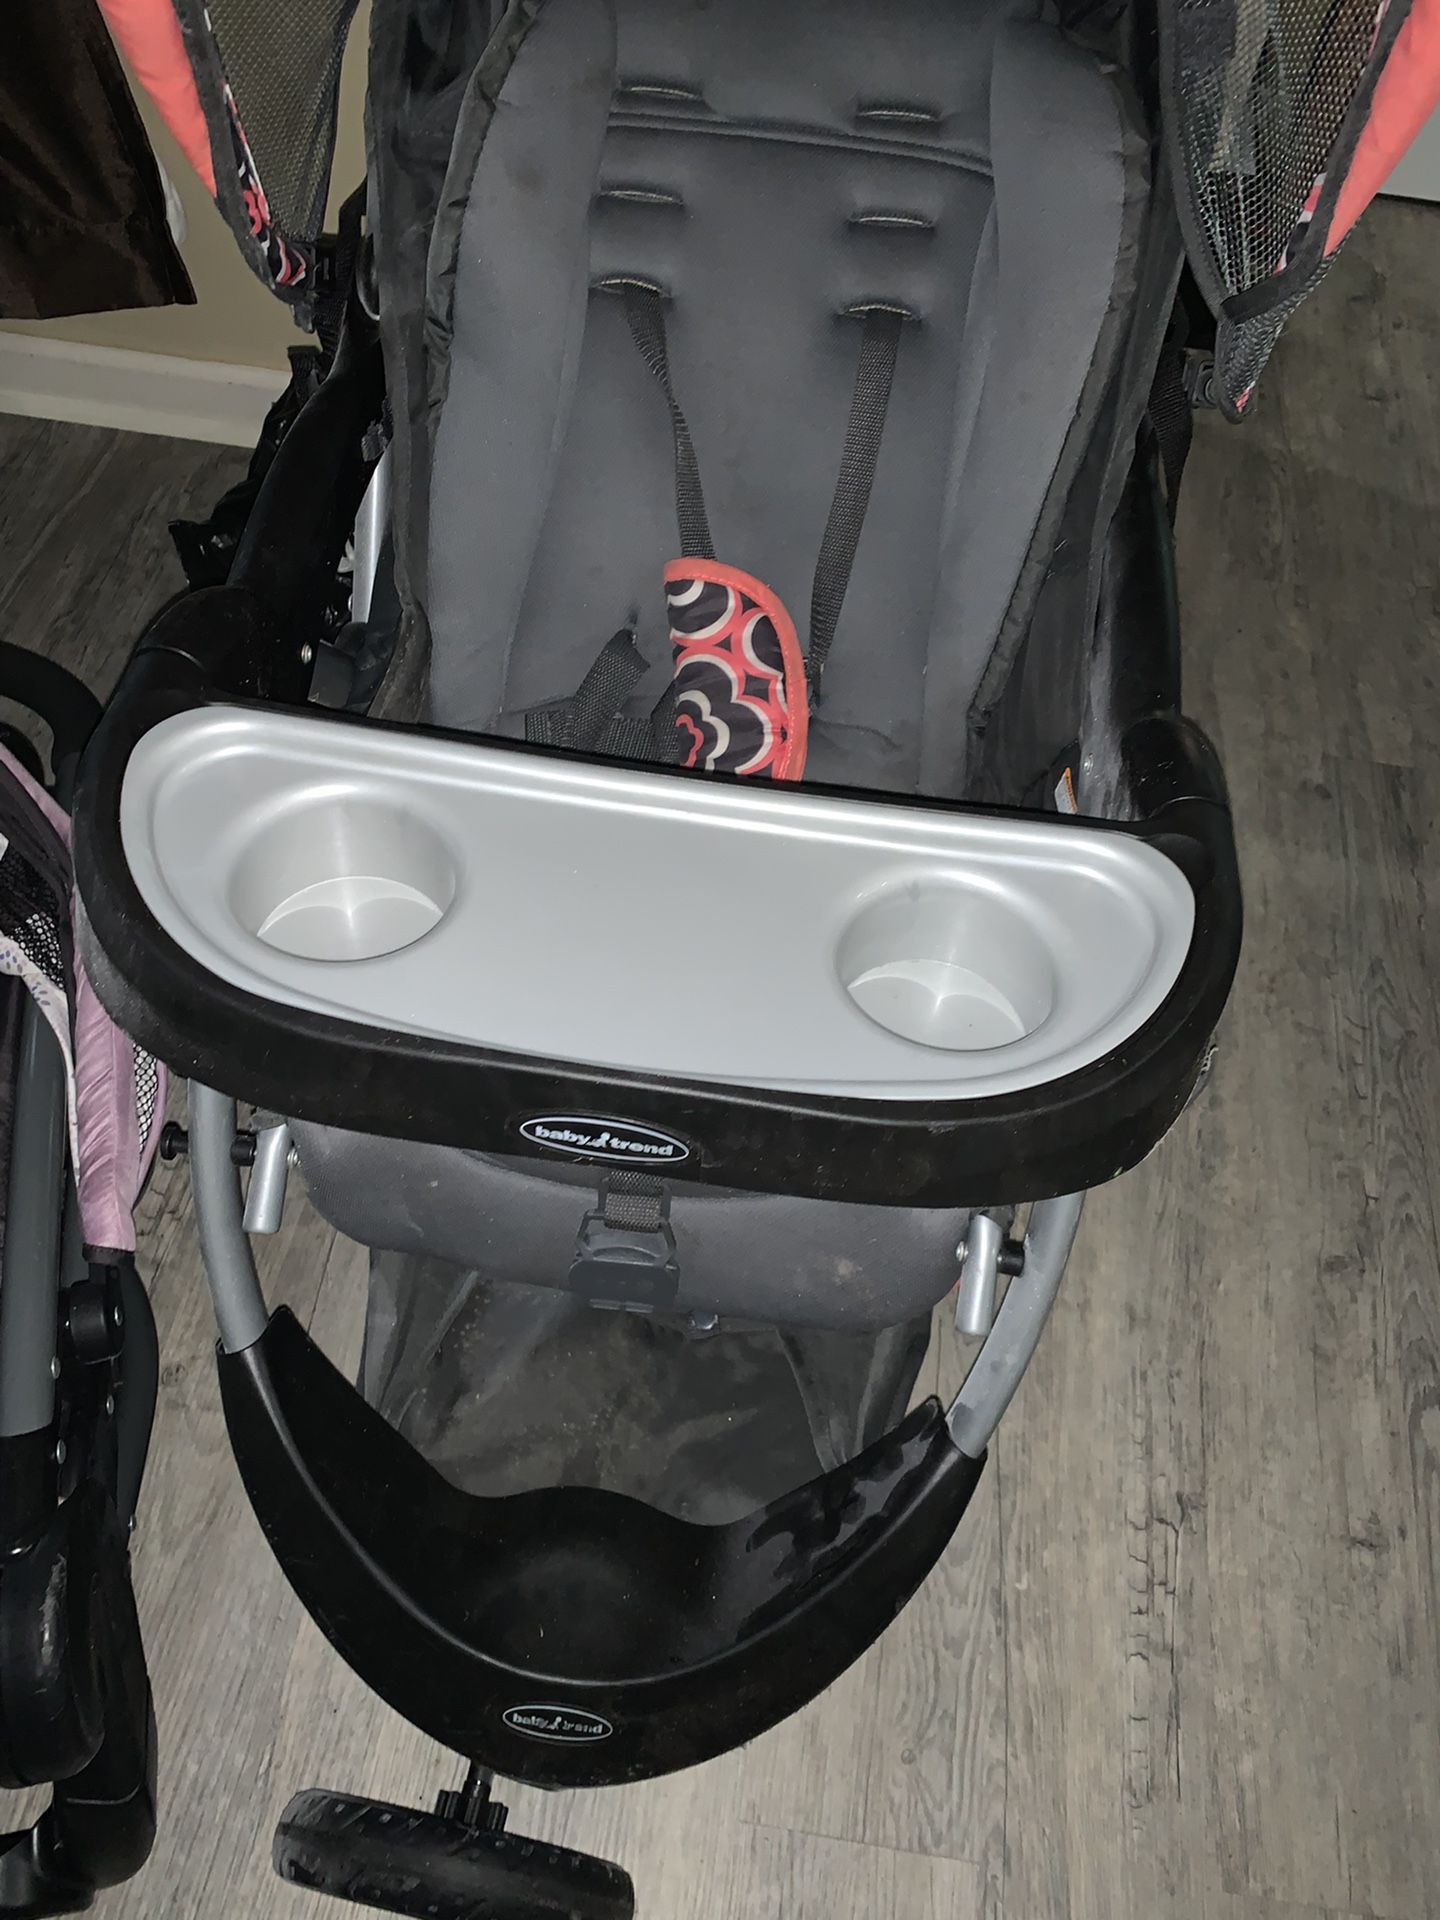 Baby trend strollers Free